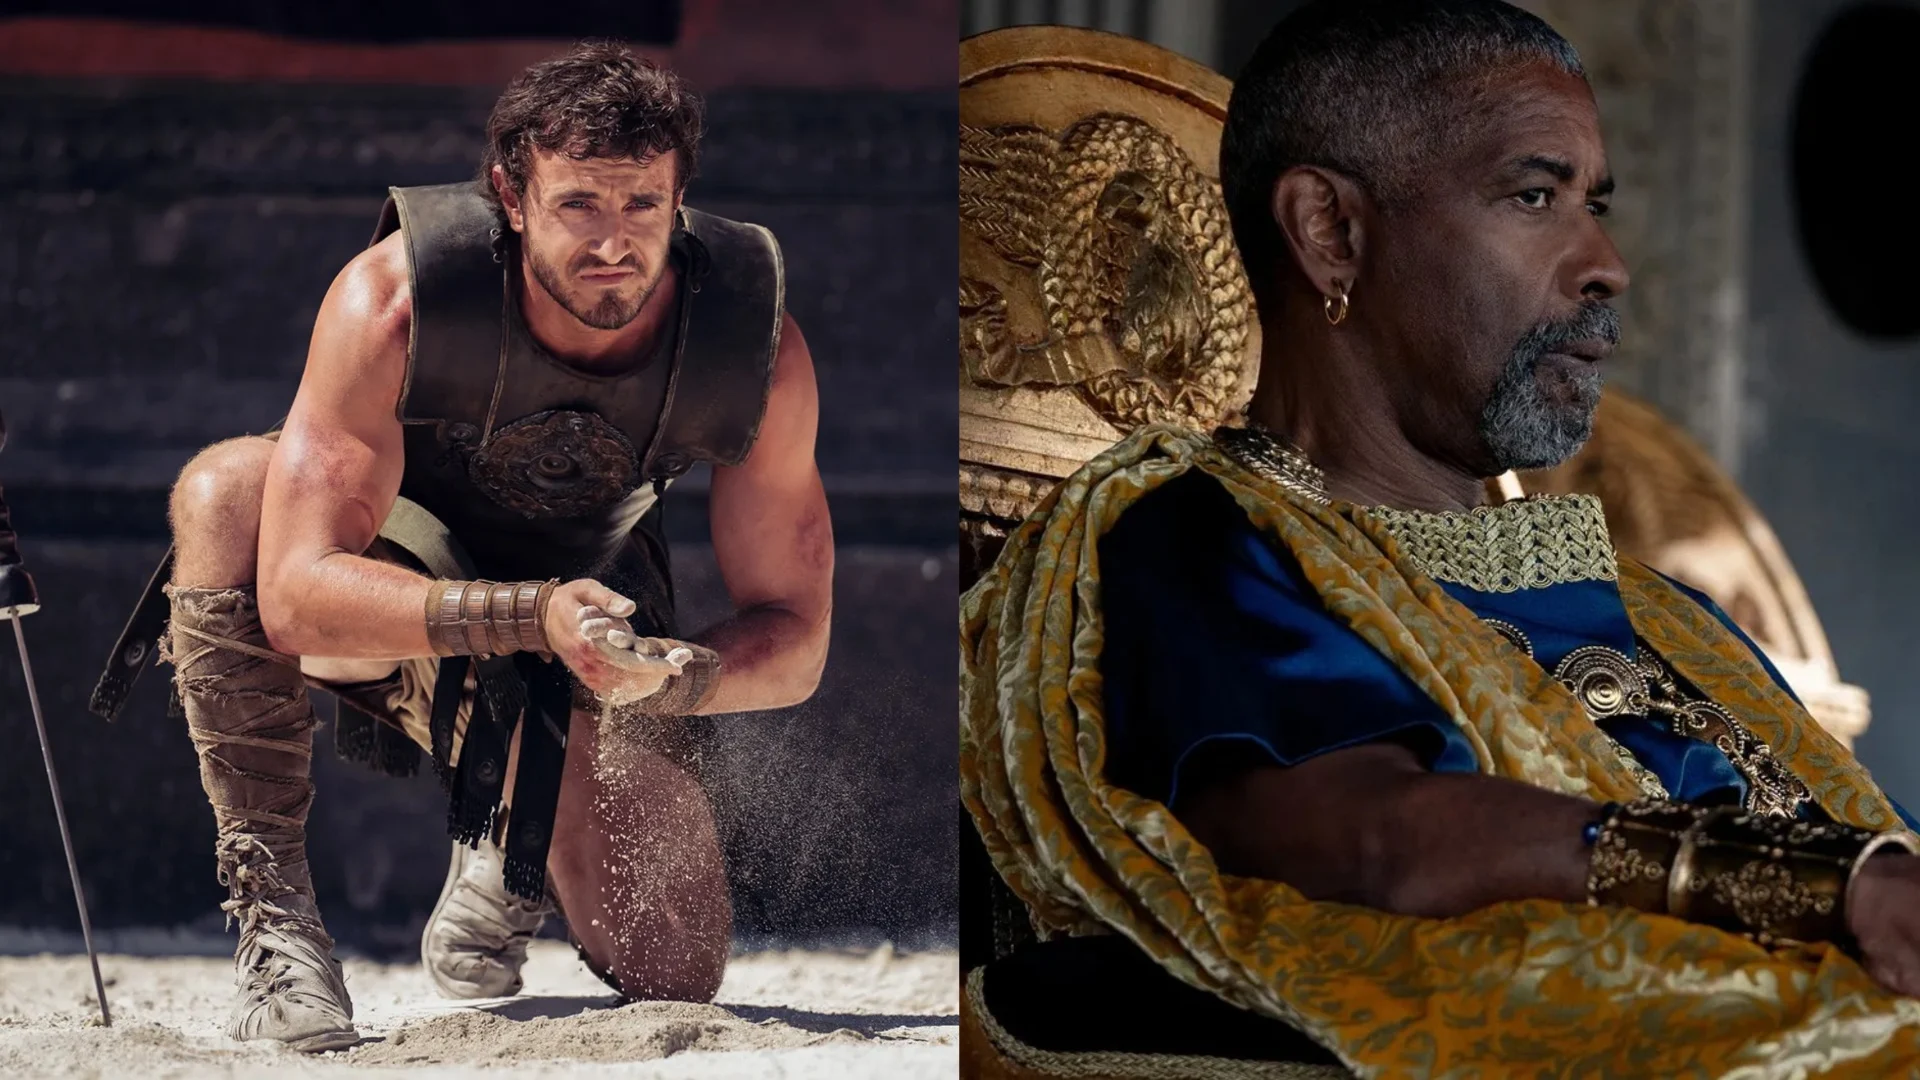 From battles with a rhinoceros to rebellion against Rome: the first trailer of the historical film "Gladiator II" has been released